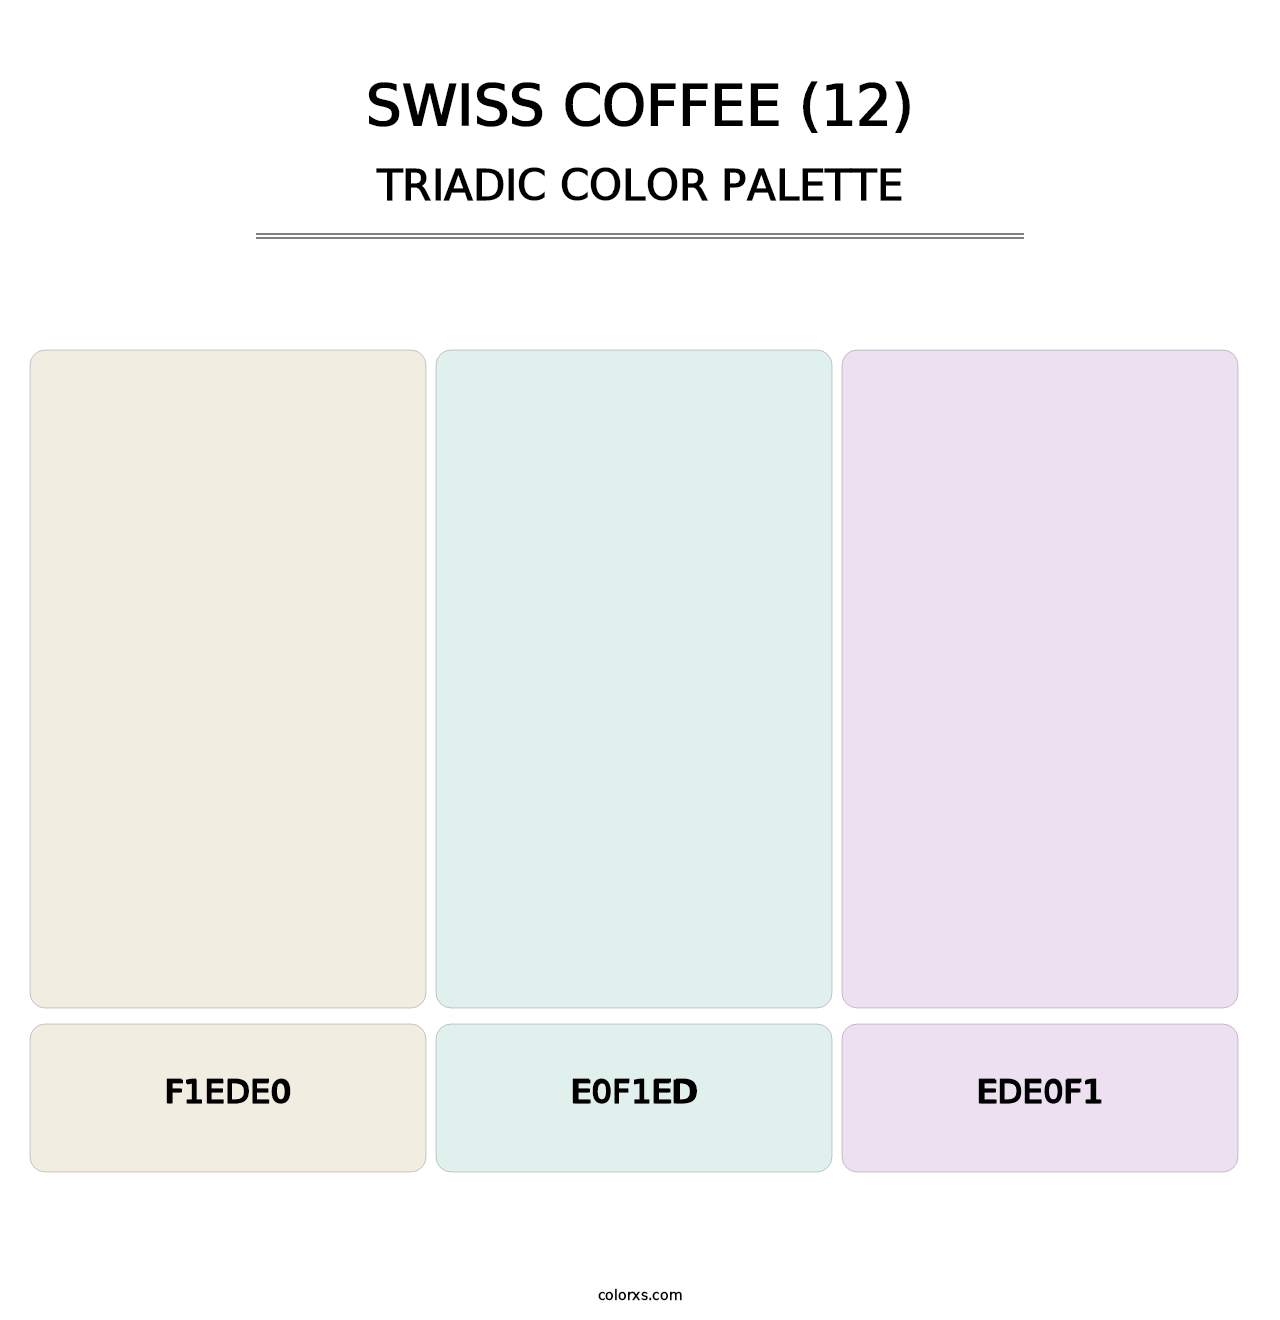 Swiss Coffee (12) - Triadic Color Palette